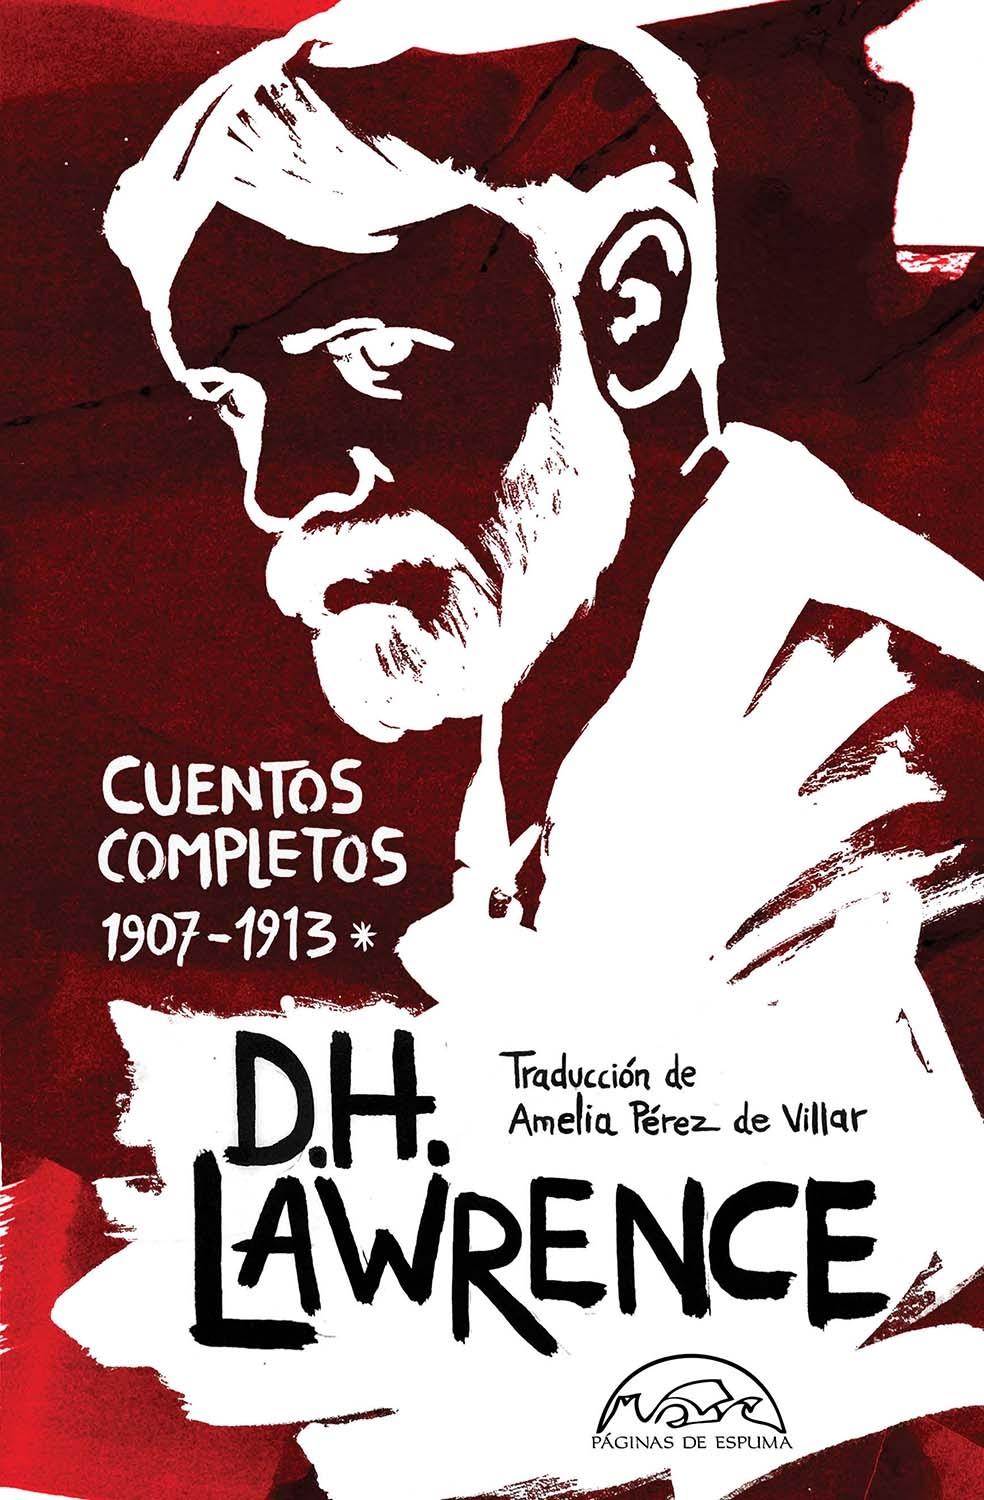 Cuentos Completos I (1907-1913) D.H Lawrence